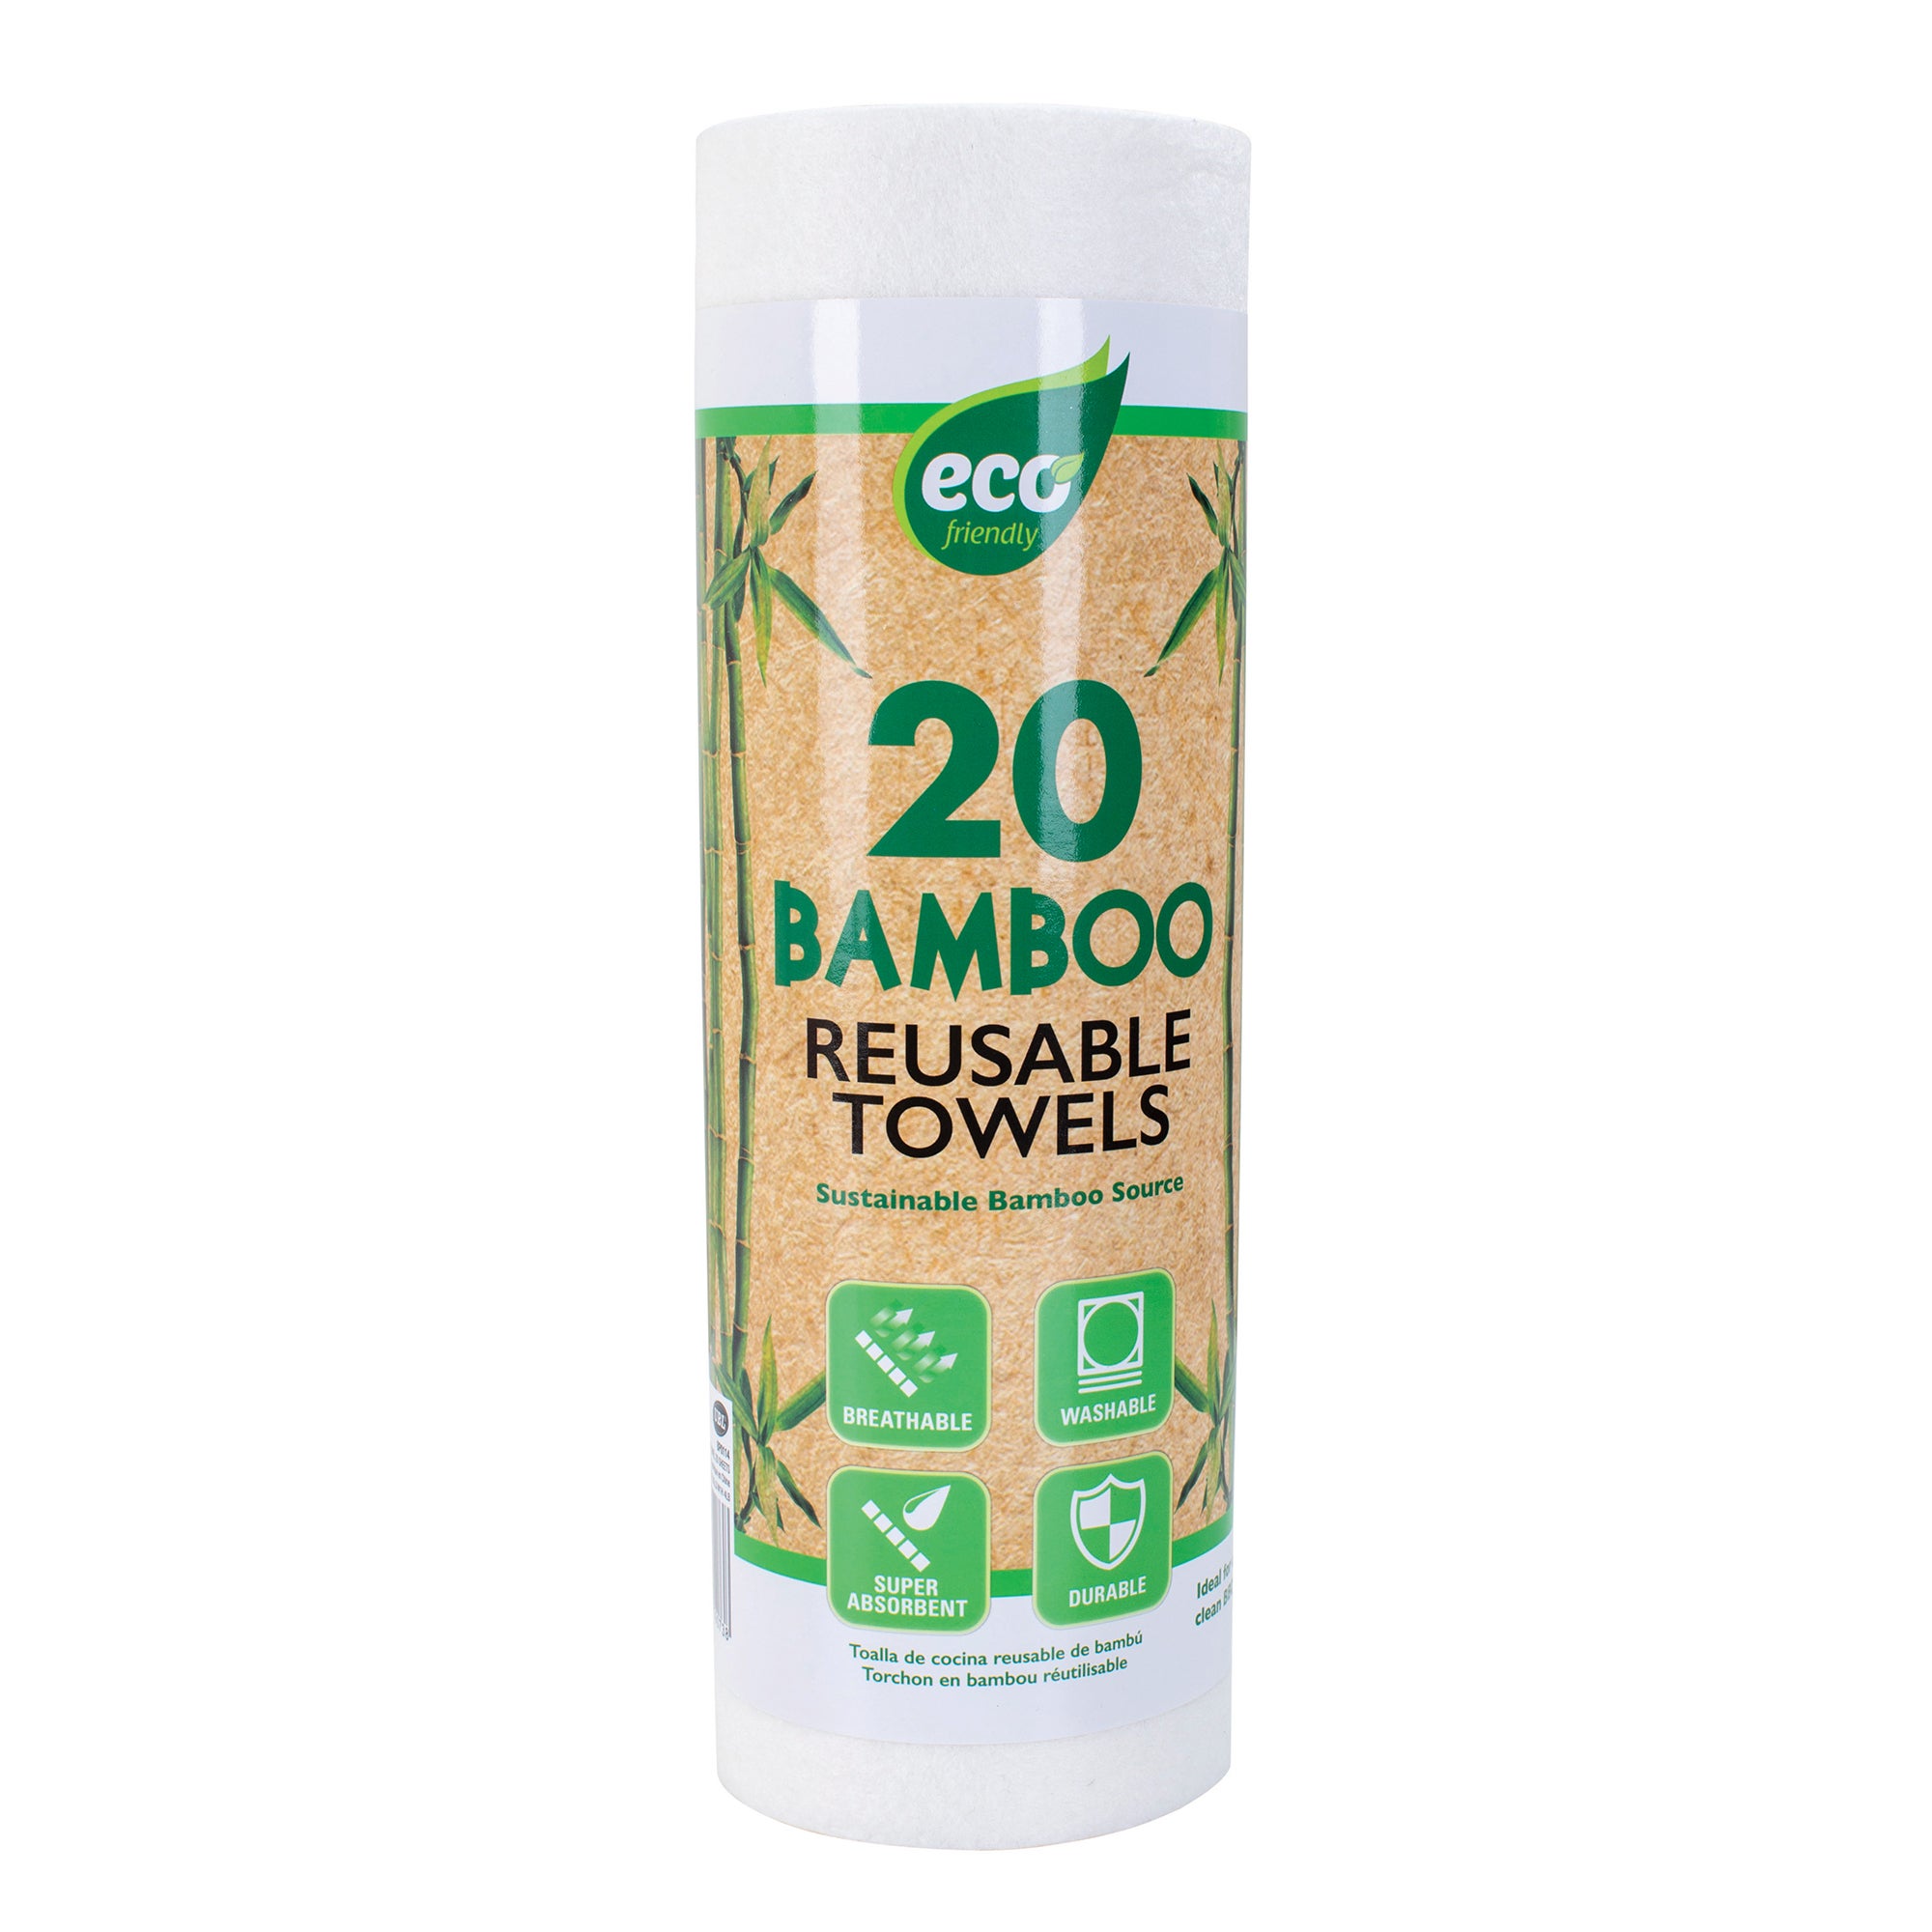 Reusable Bamboo Kitchen Towel, Laundry and Cleaning